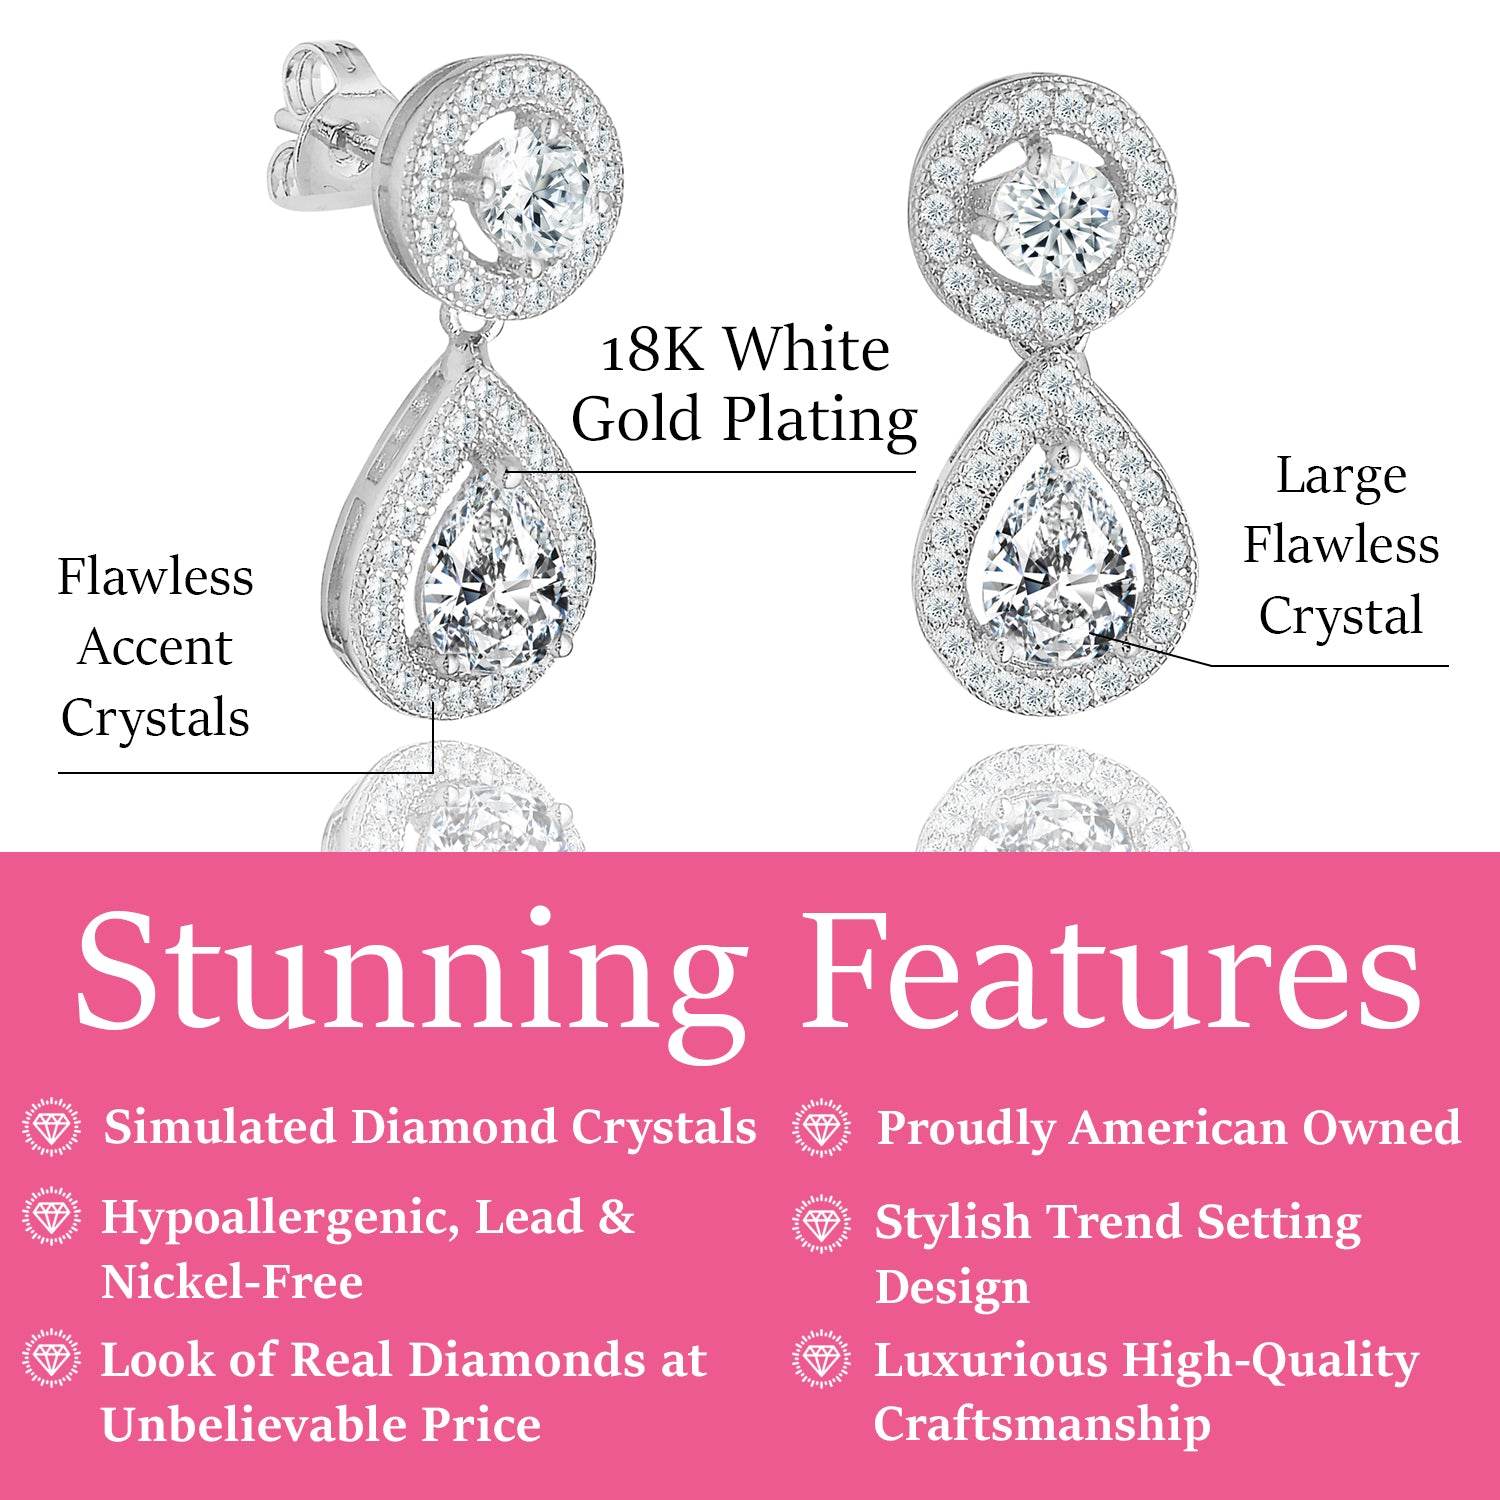 Elora 18k White Gold Plated Silver Tear Drop Stud Earrings with Simulated Diamond CZ Crystals